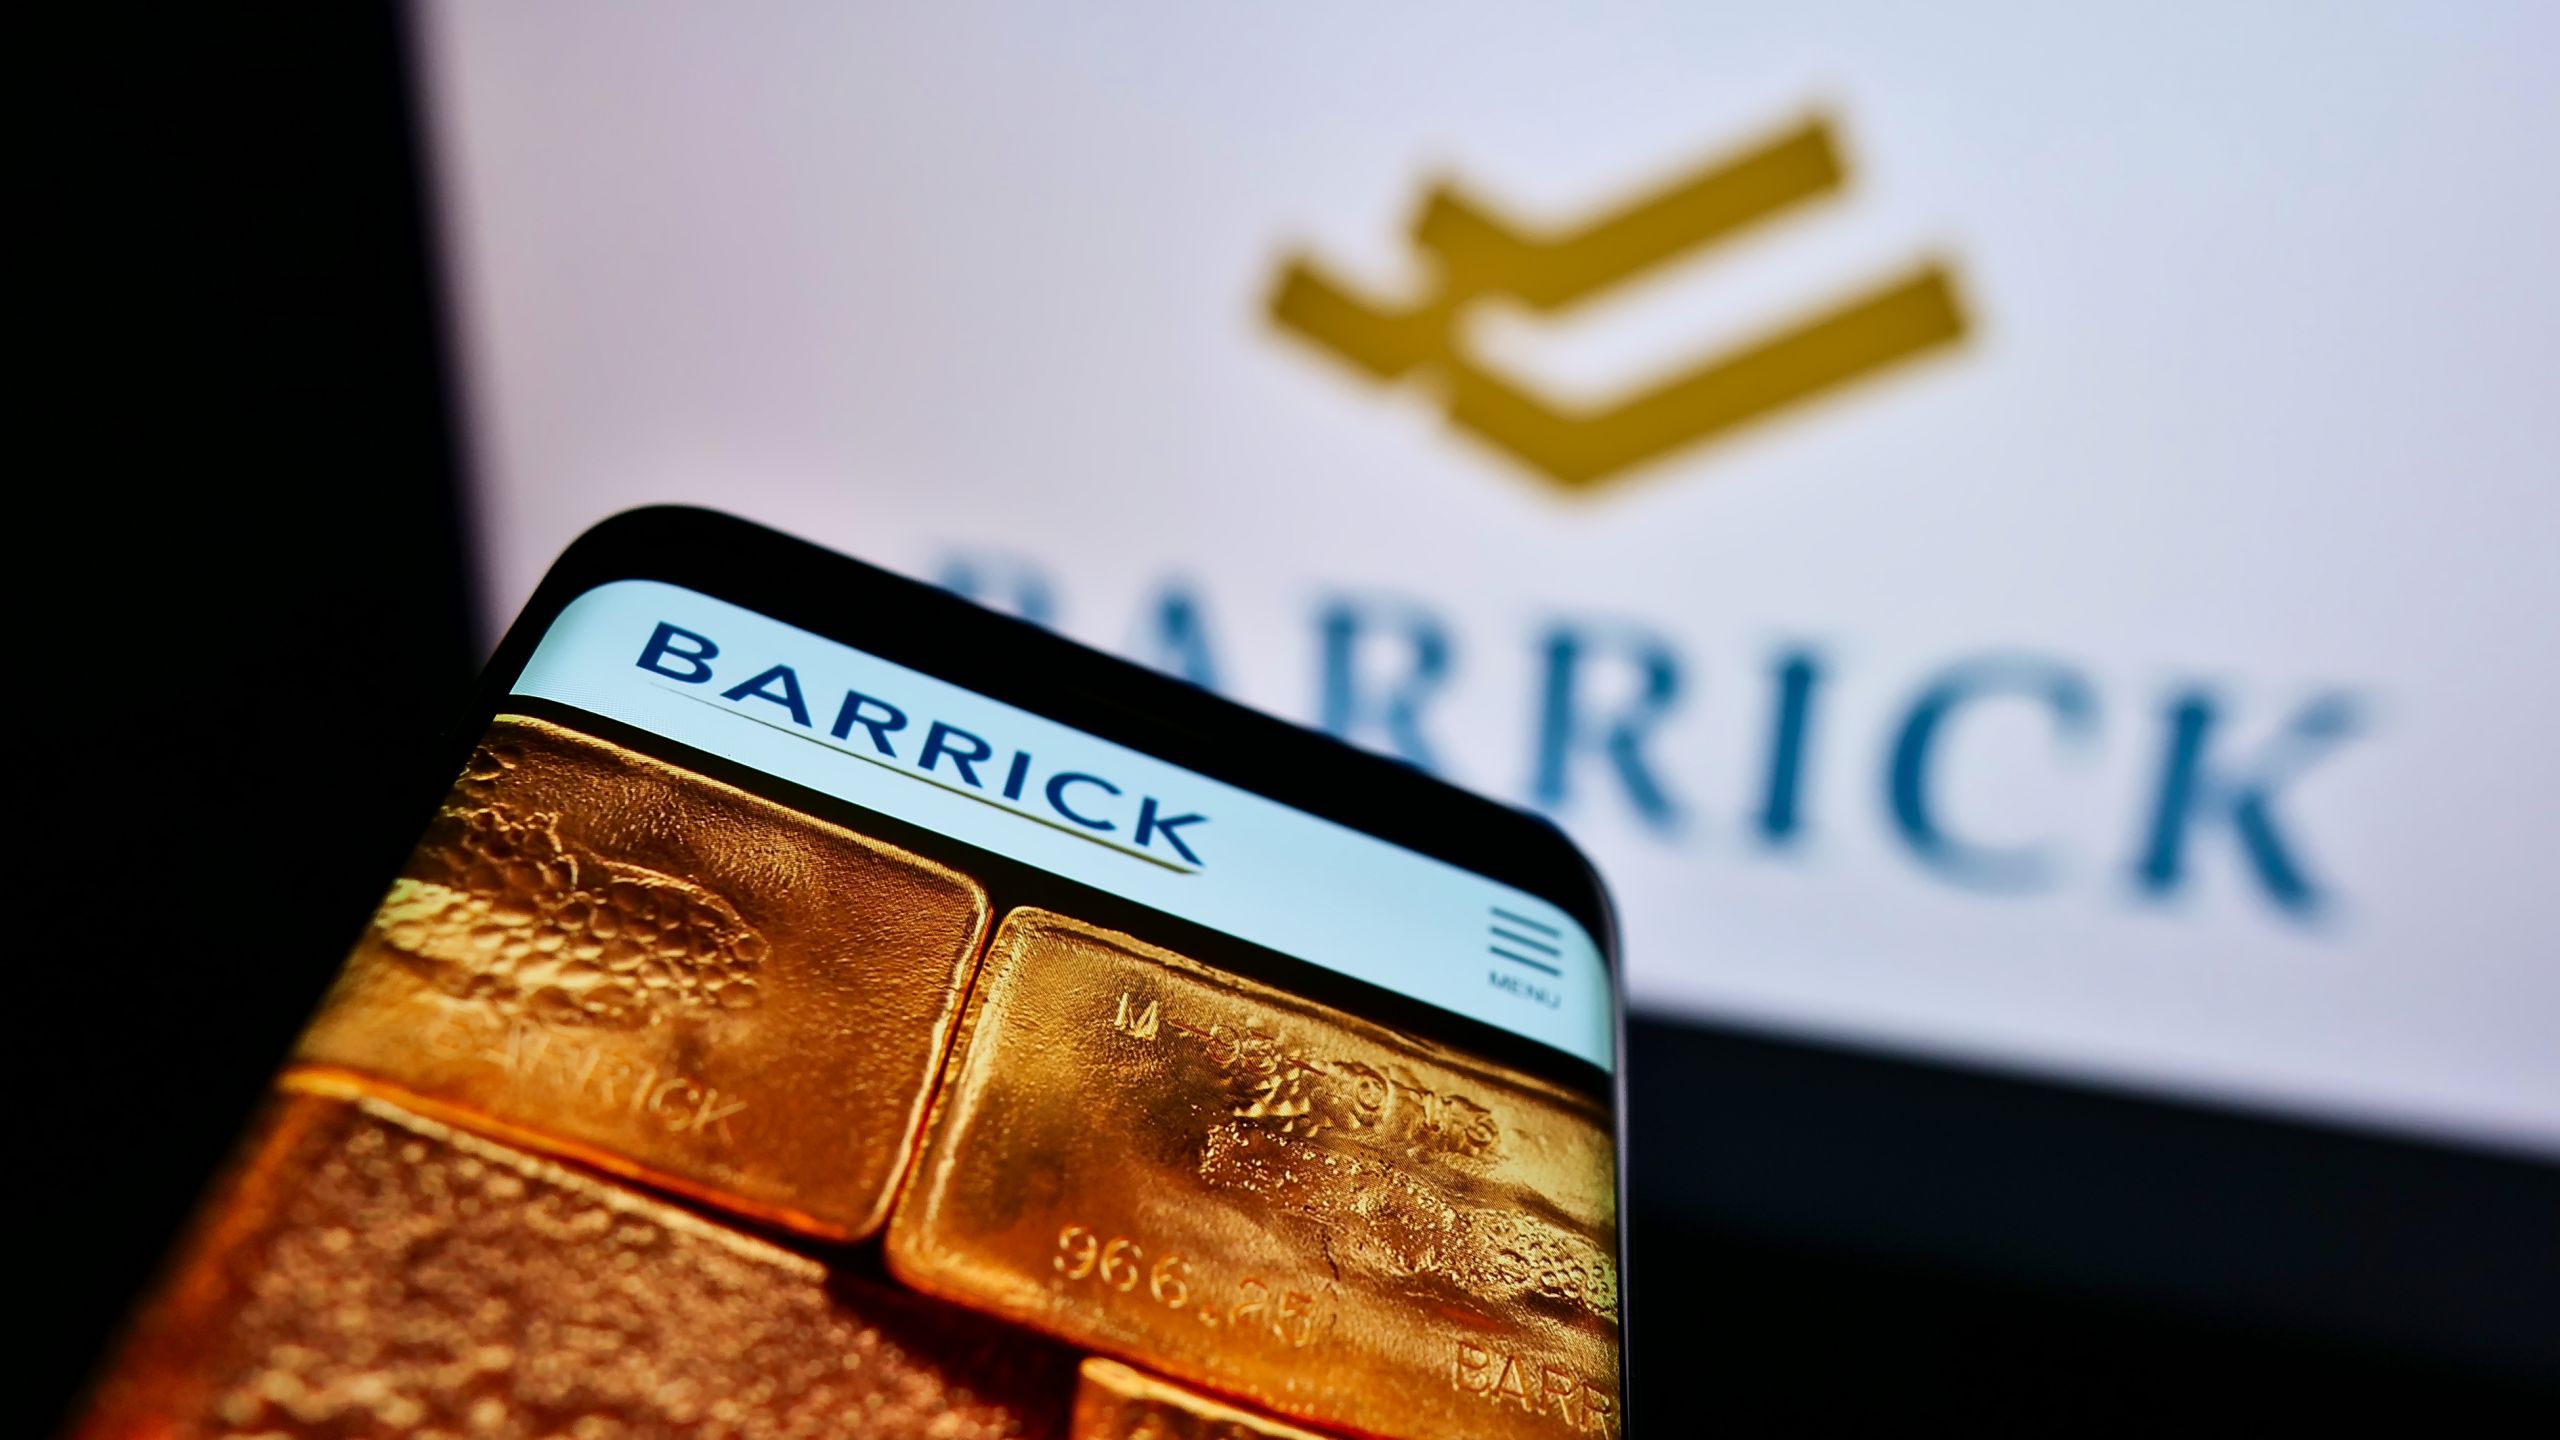 Read more about the article Barrick Gold-Aktie: Ein leicht positiver Indikator!